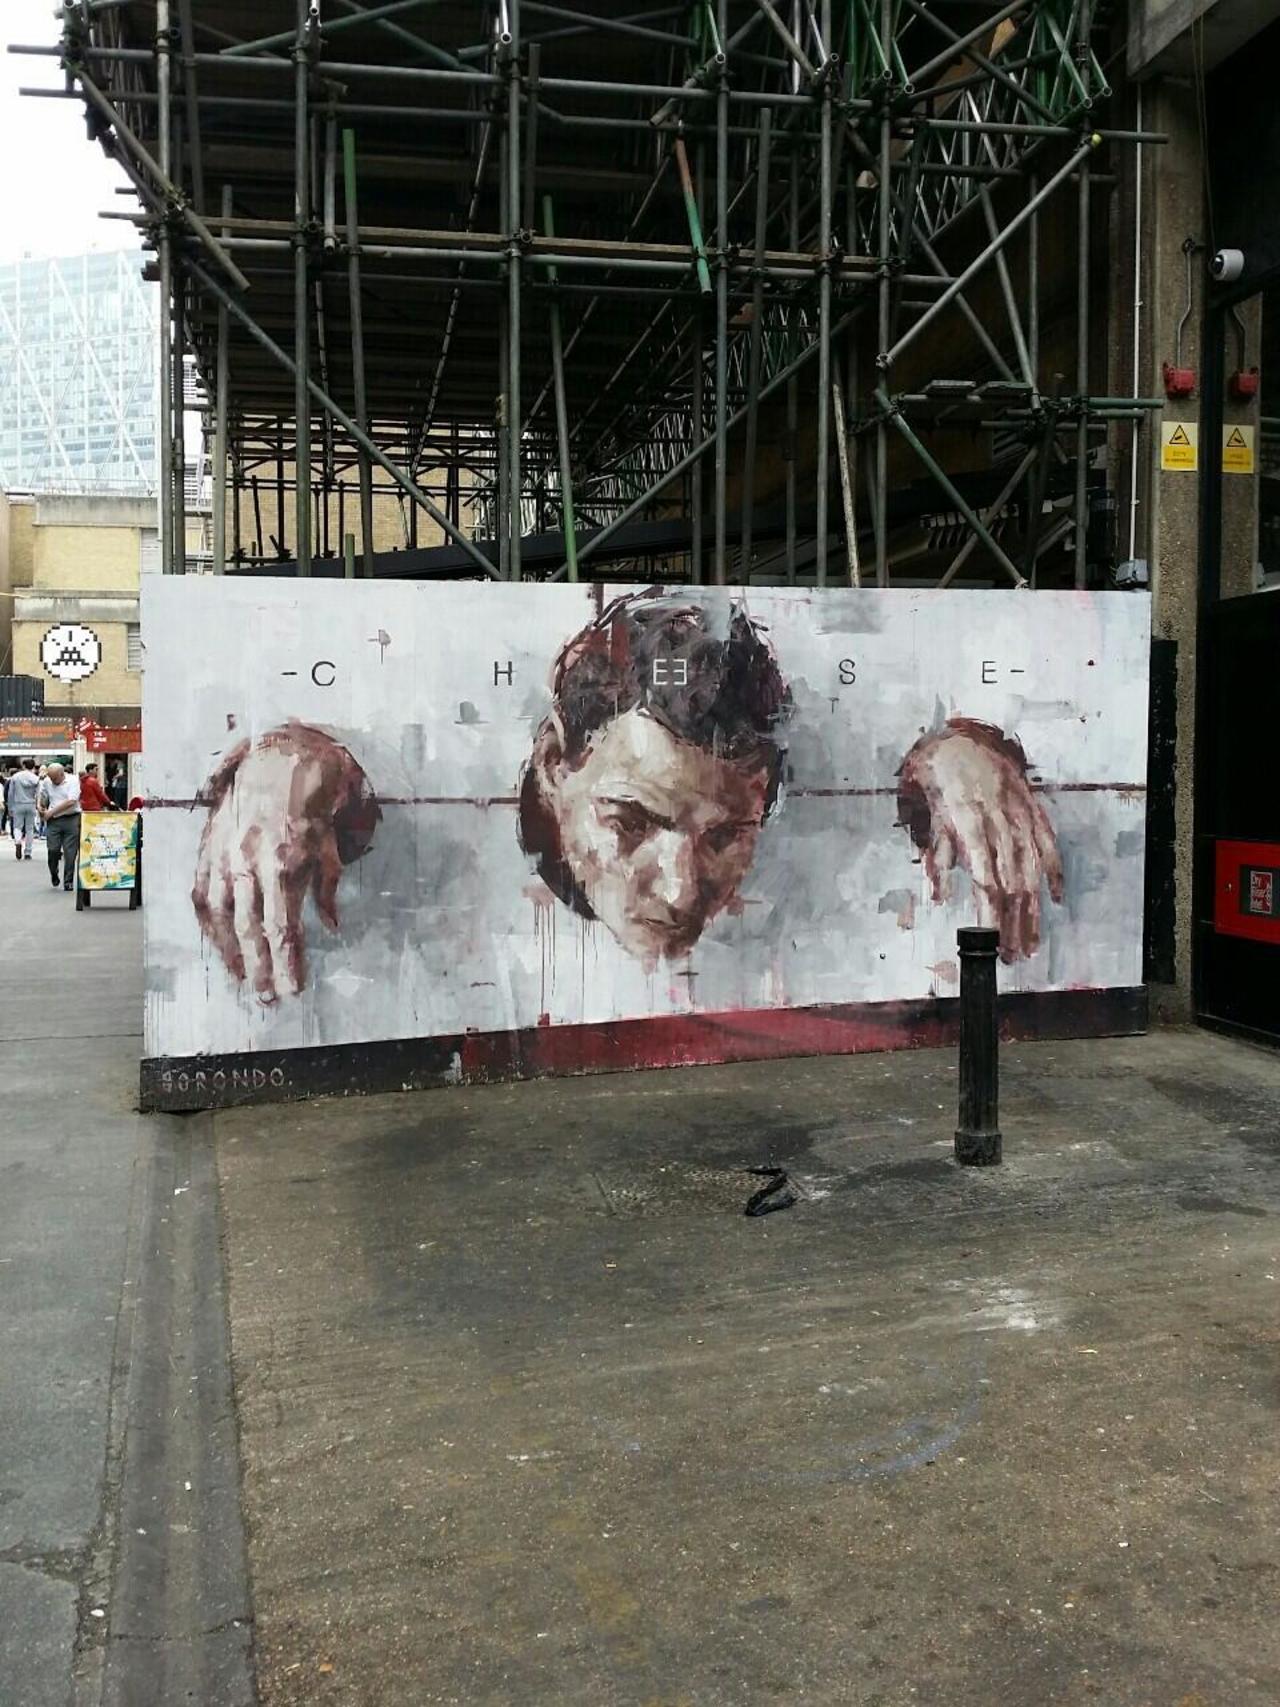 RT @EastGraffiti: 'Say cheese' Another epic #Borondo piece by #bricklane, Truman Brewery #streetart #graffiti http://t.co/mEPlSTwyGD